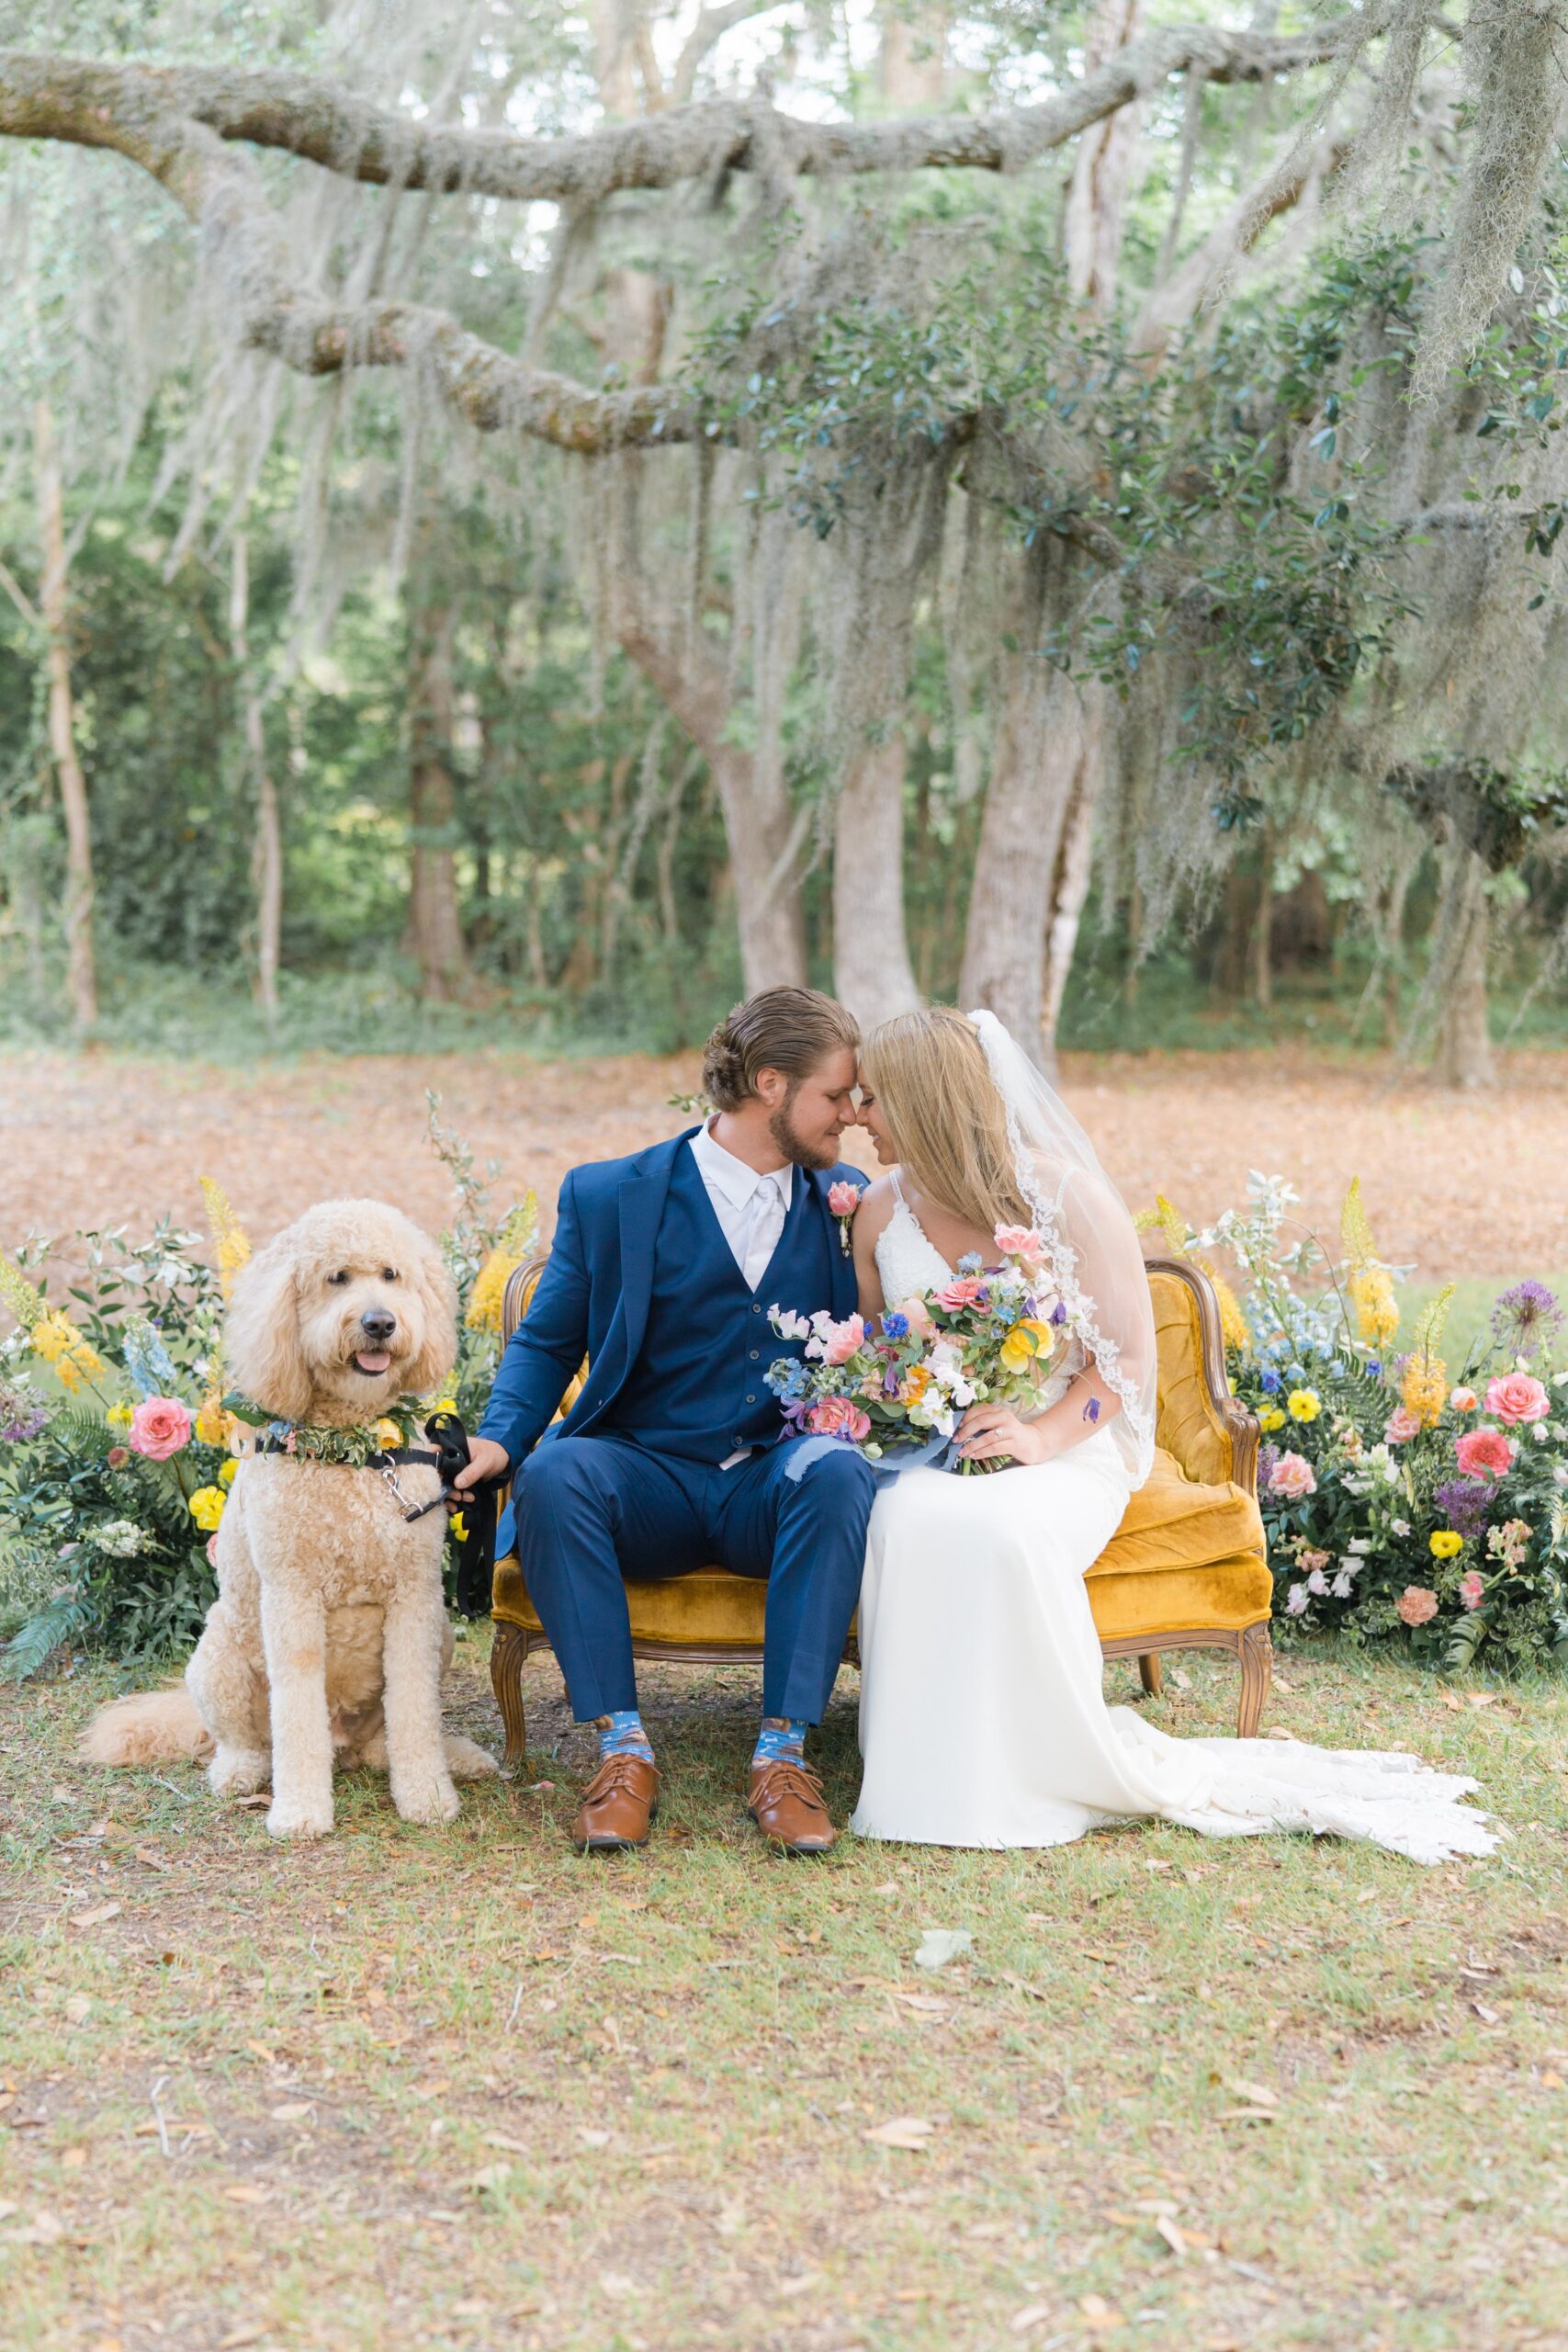 bride and groom sit on yellow vintage couch with doodle and wildflowers